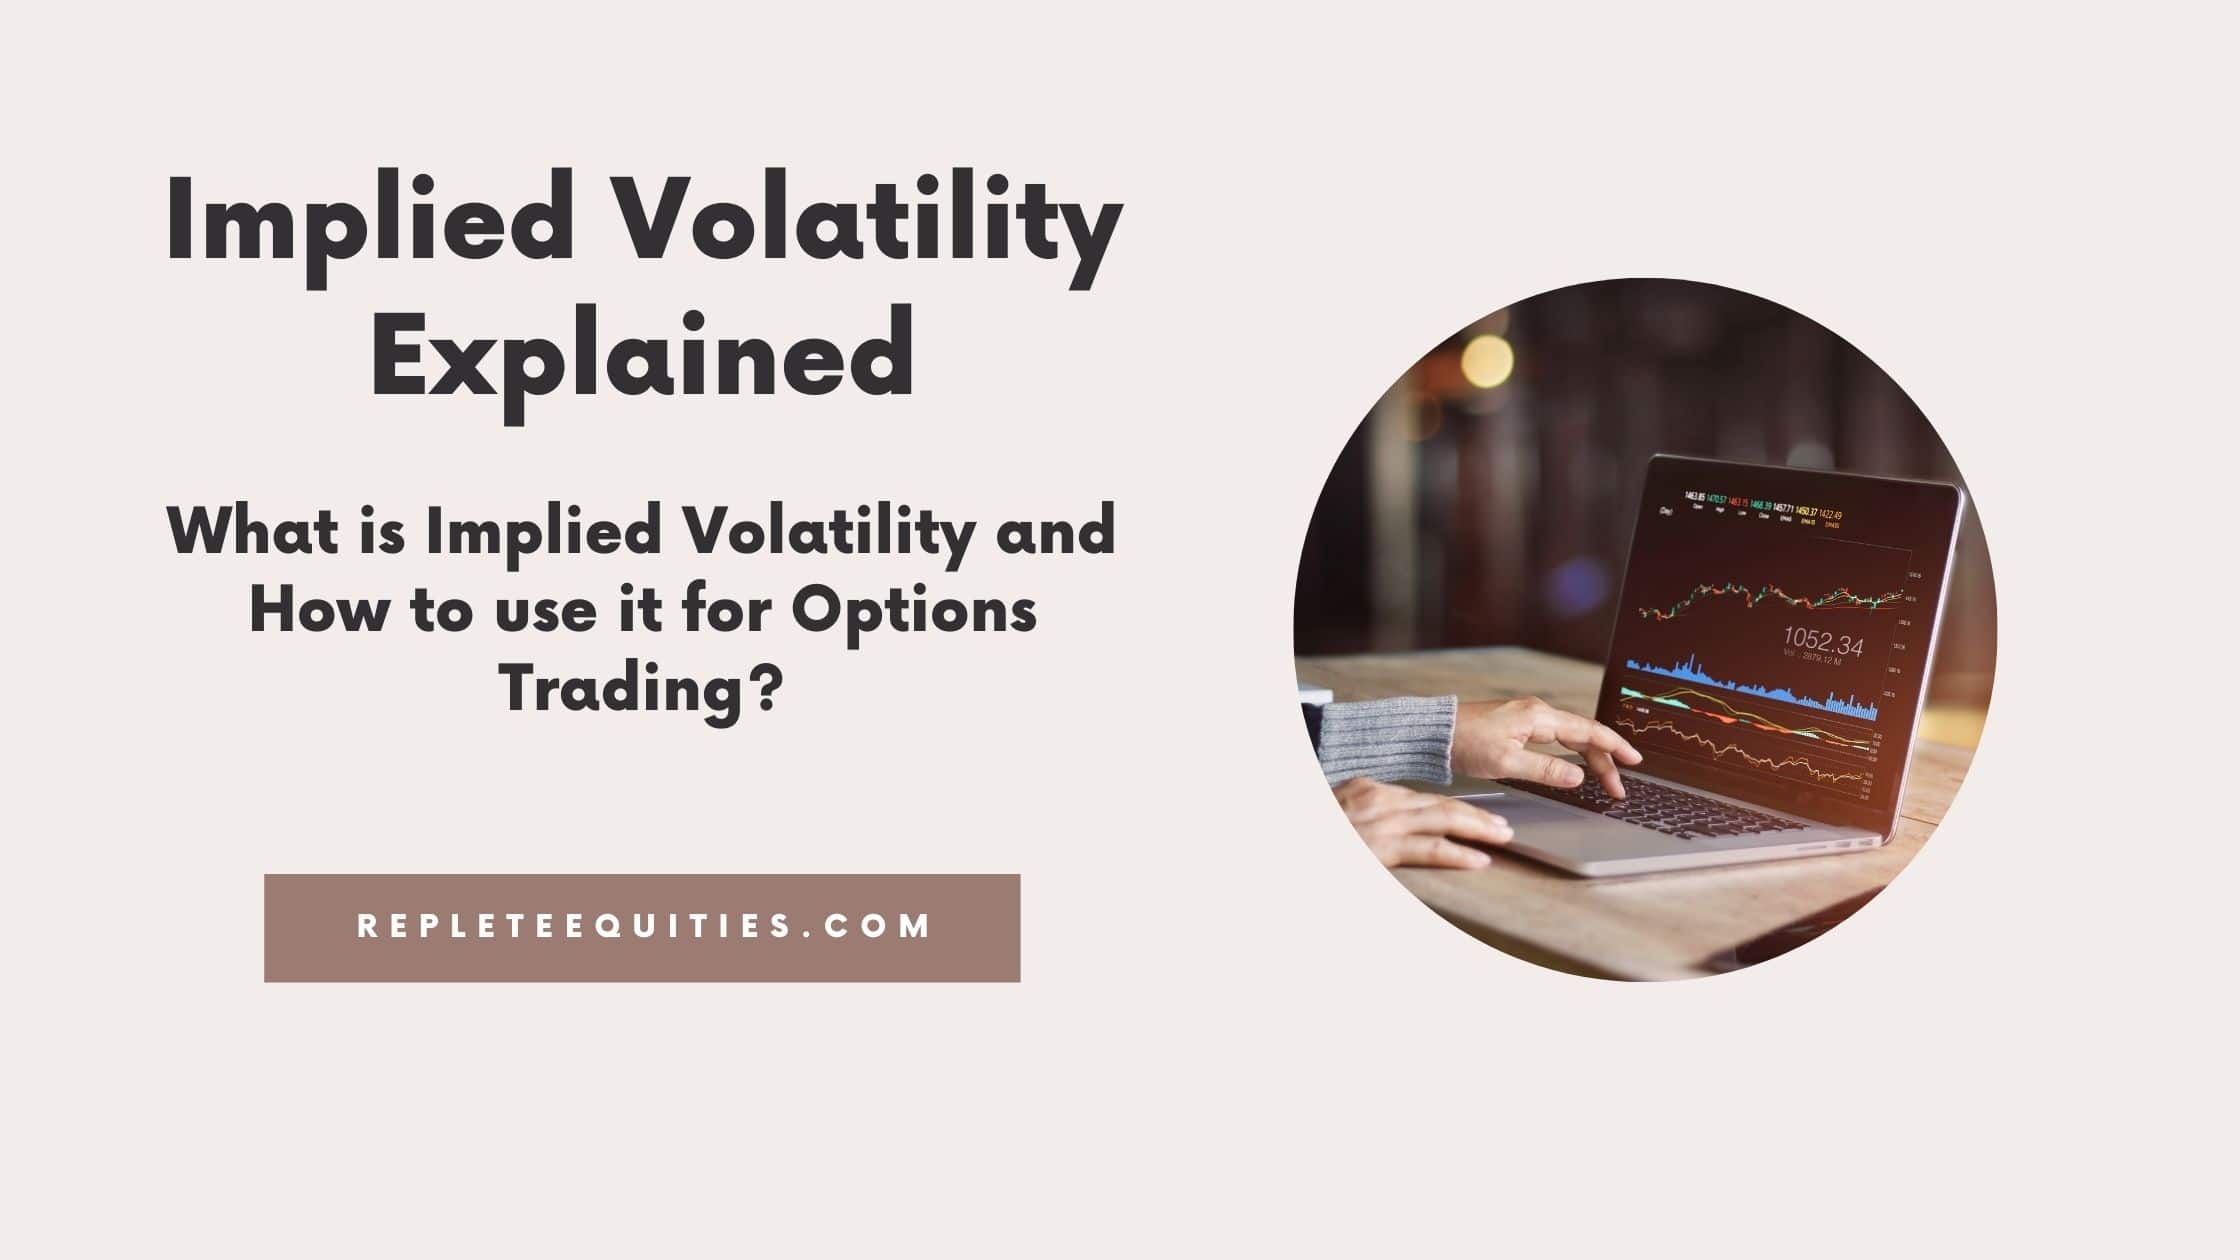 What is Implied Volatility and How to use it for Options Trading?